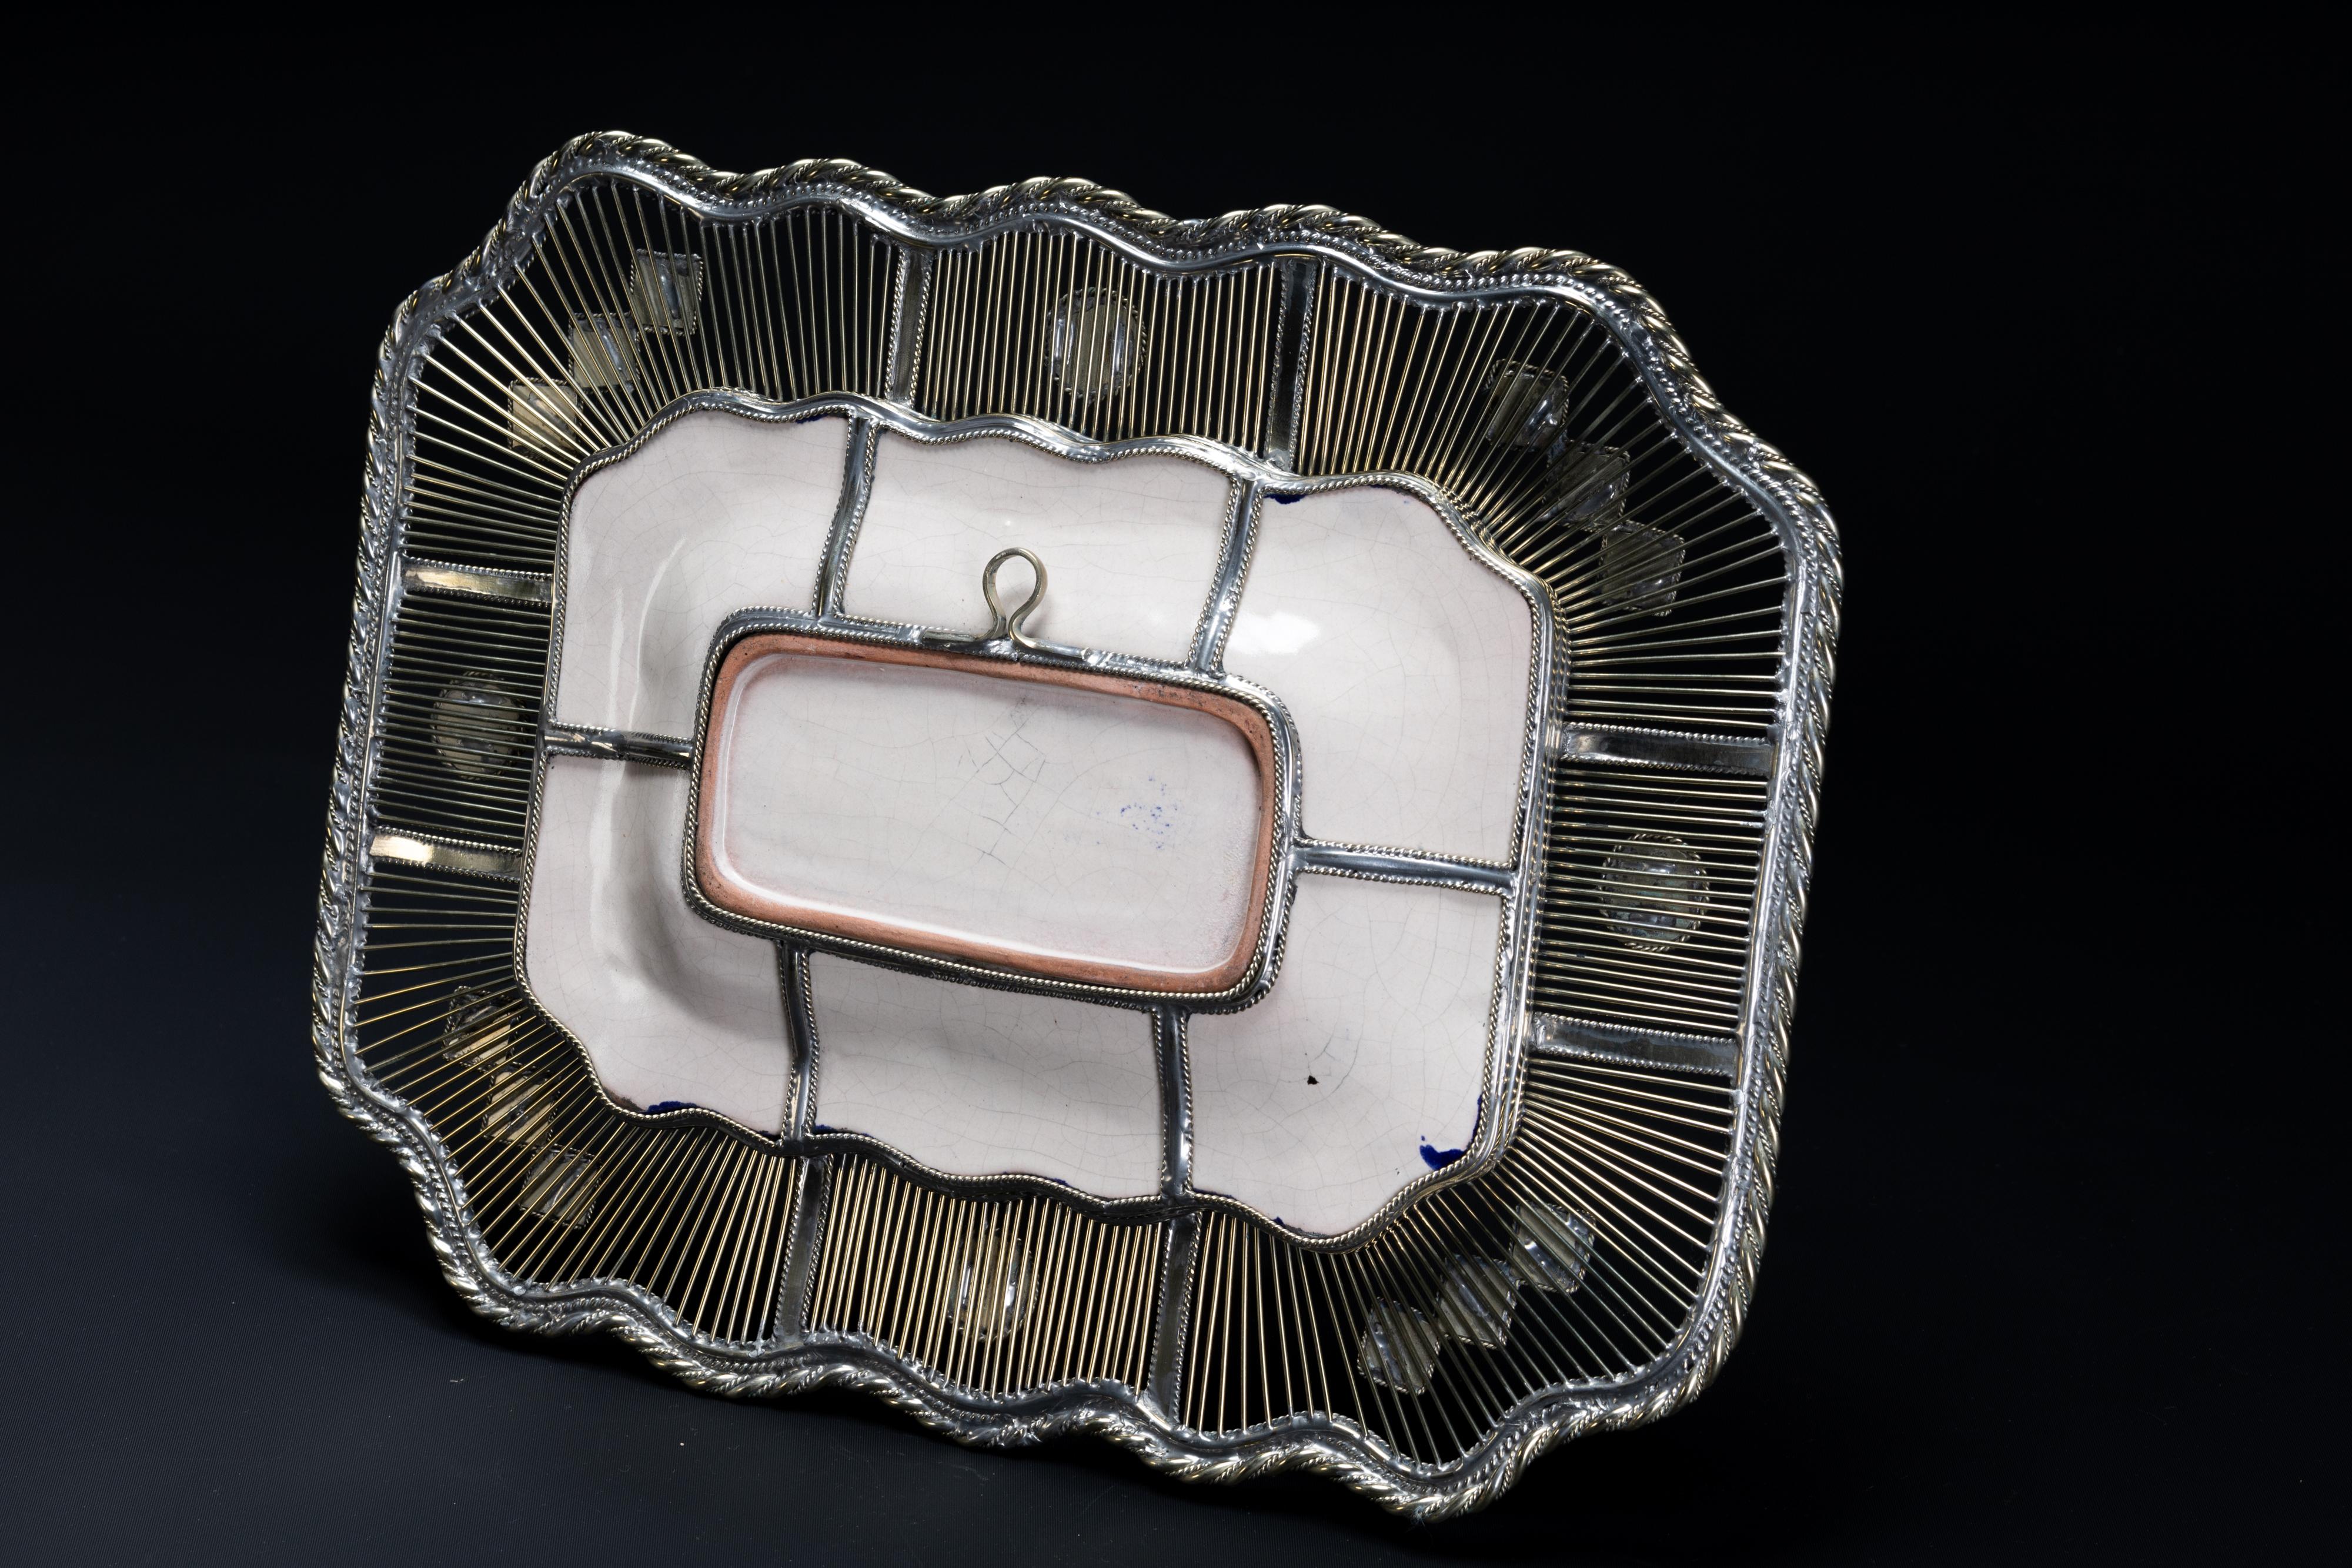 Always unique pieces is what you are going to hear about Jesus Guerrero Santo's work, all the pieces are handmade and created one by one it takes months to produce each peace.
This ceramic and white metal (alpaca) bowl centrepiece, was created in